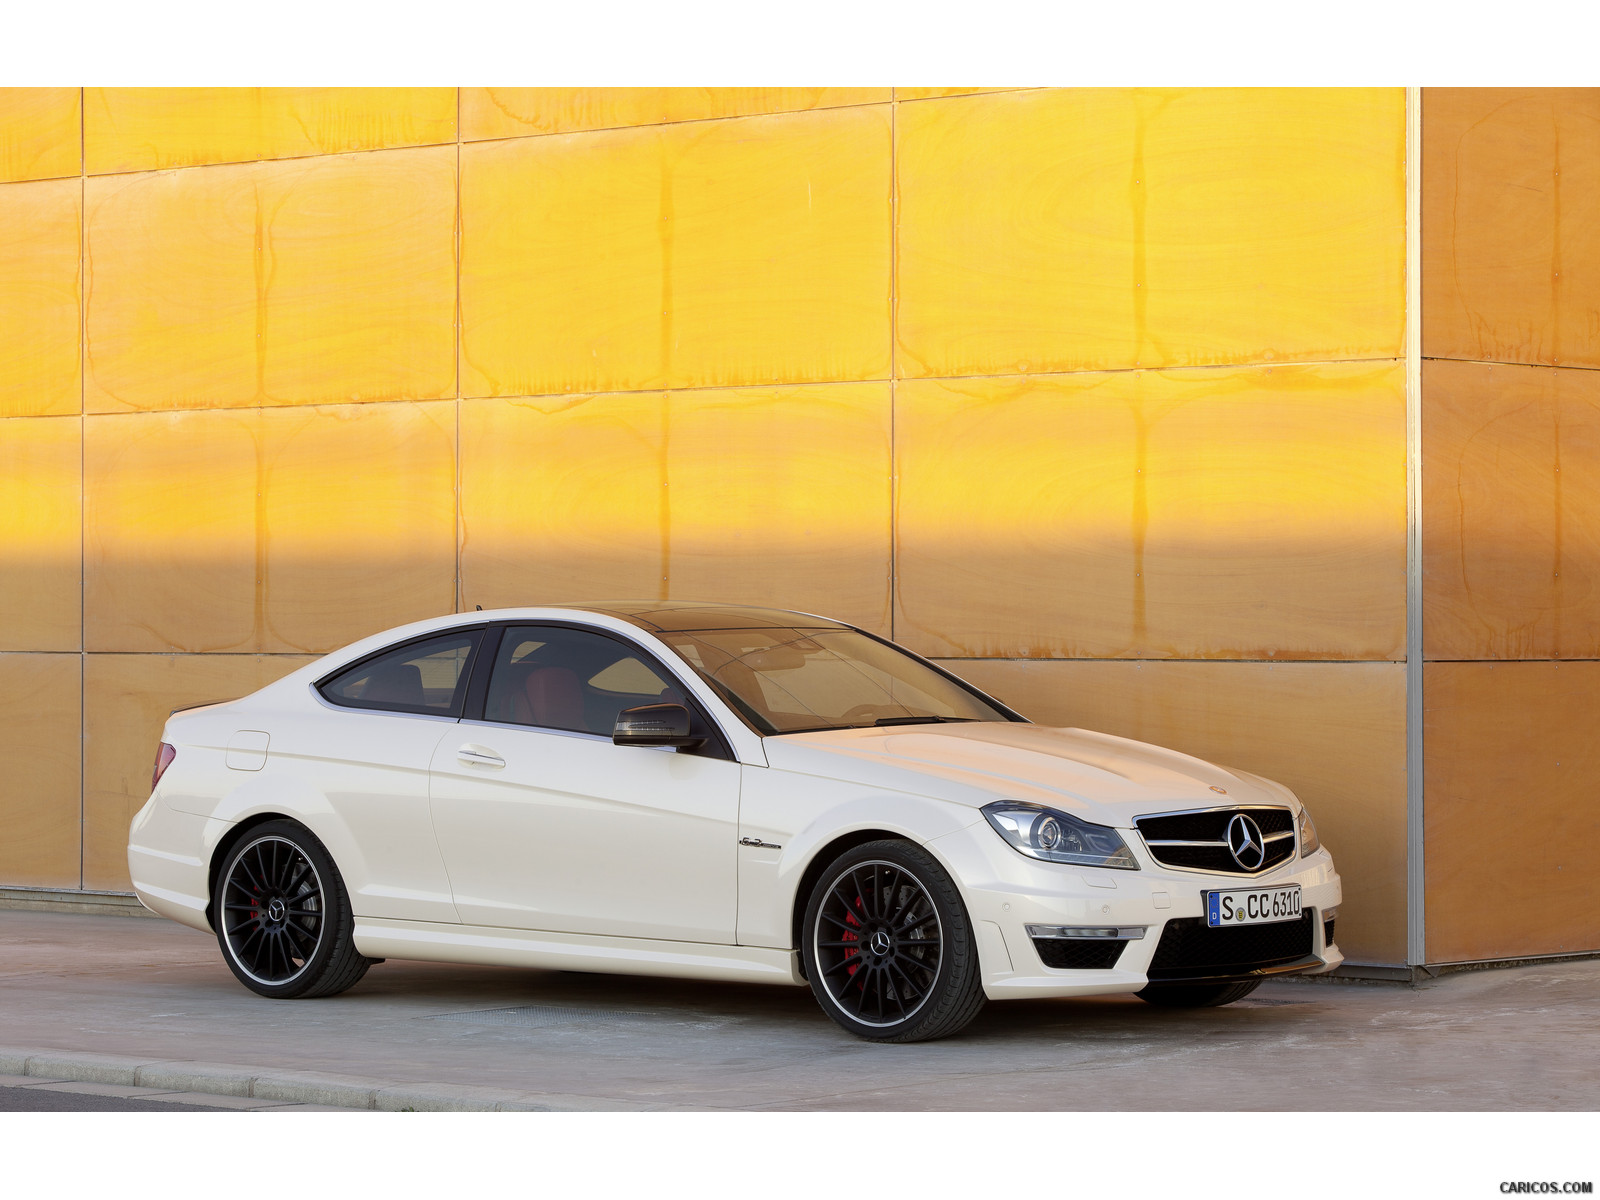 Mercedes-Benz C63 AMG Coupe (2012)  - Front, #42 of 64